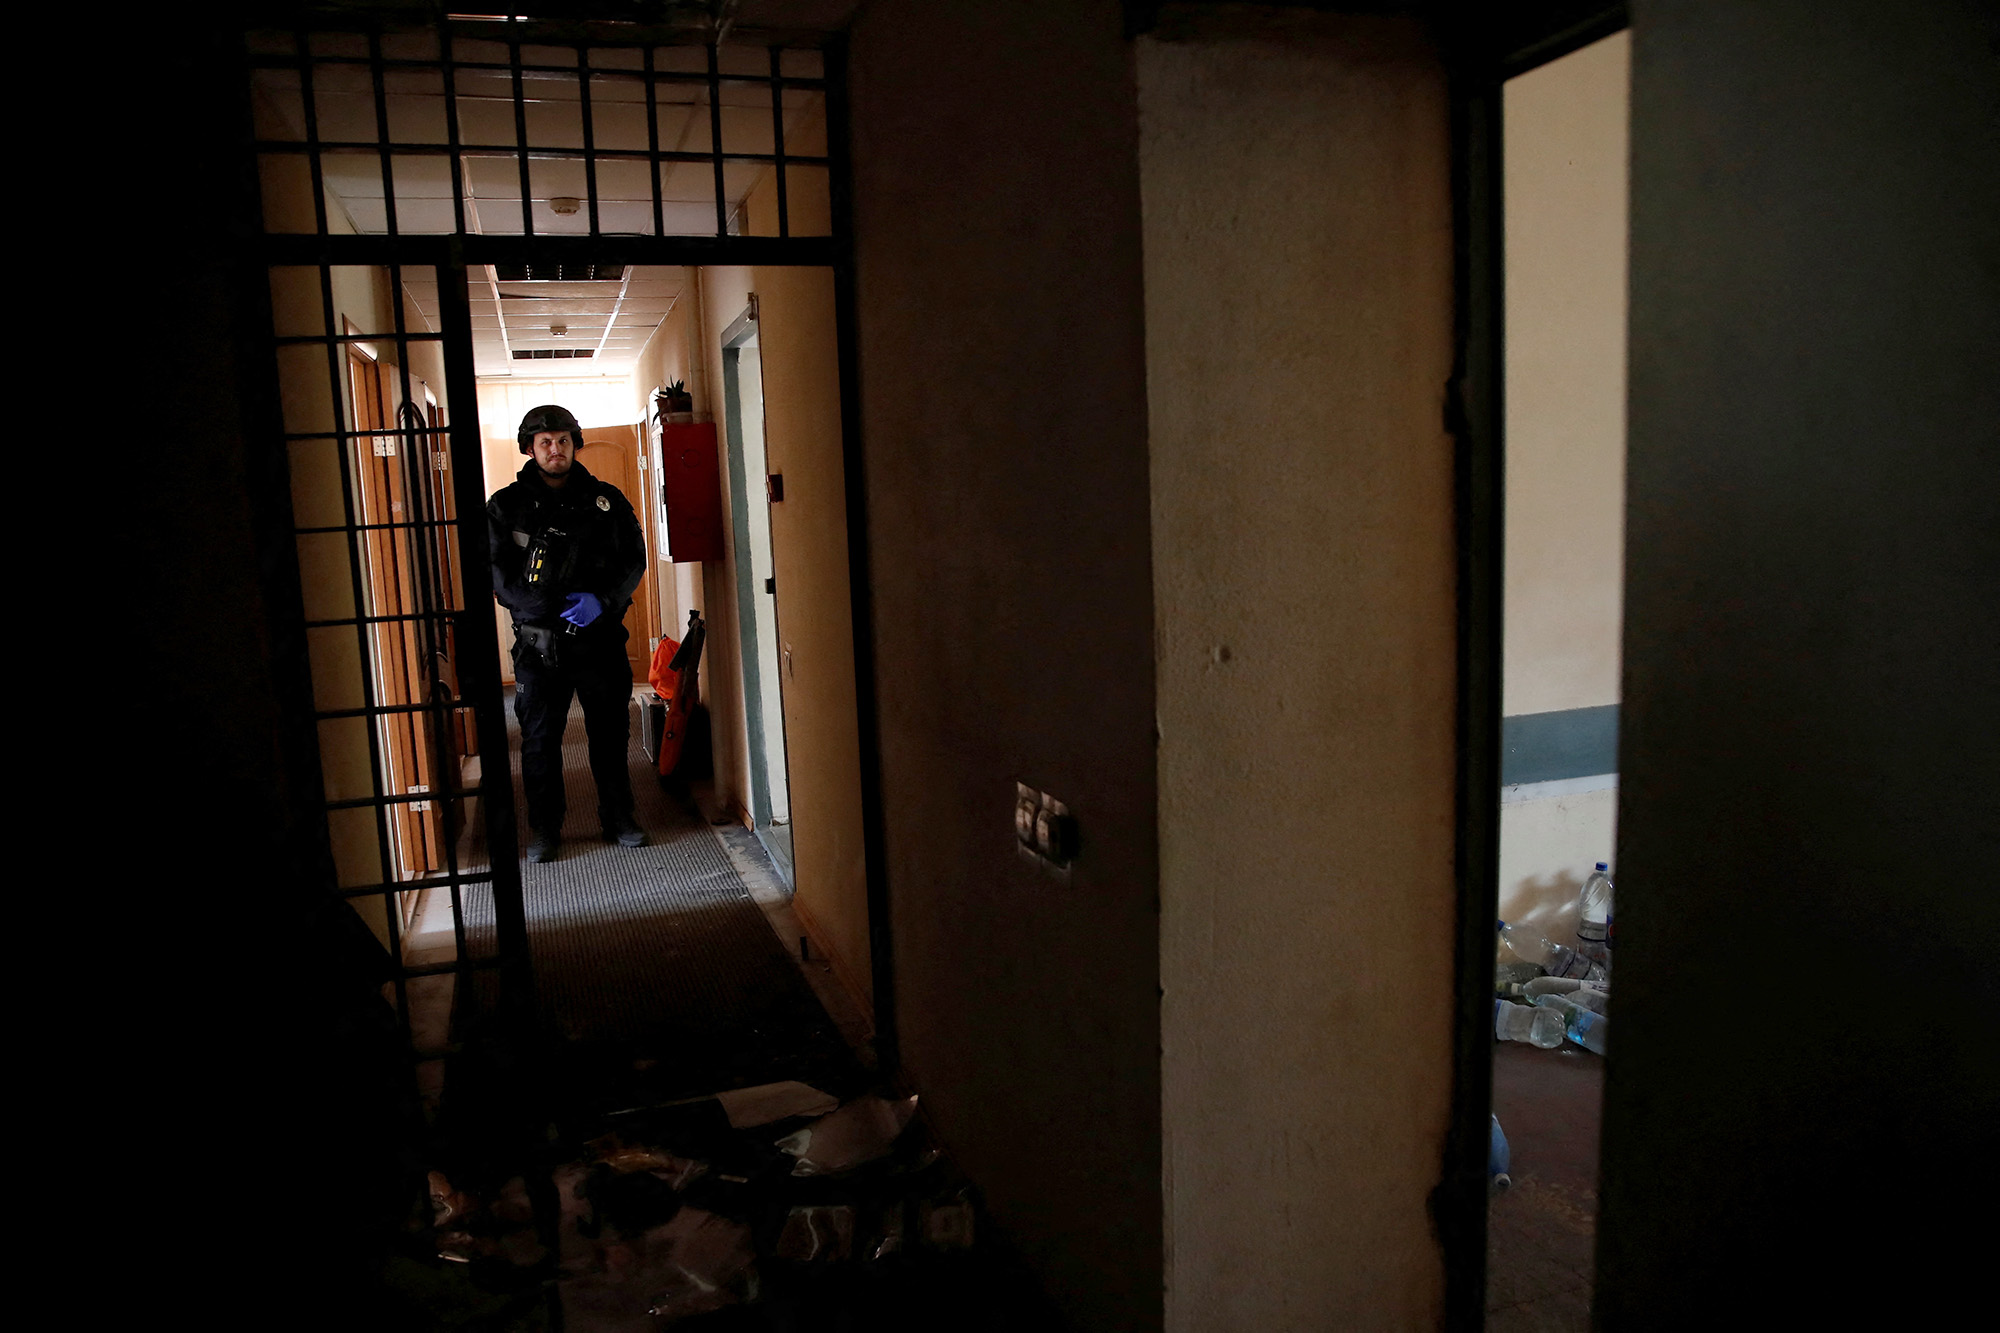 A Ukrainian police officer stands at a preliminary detention centre which Ukrainians say was used by Russian service members to jail and torture people in Kherson, Ukraine, on November 16.